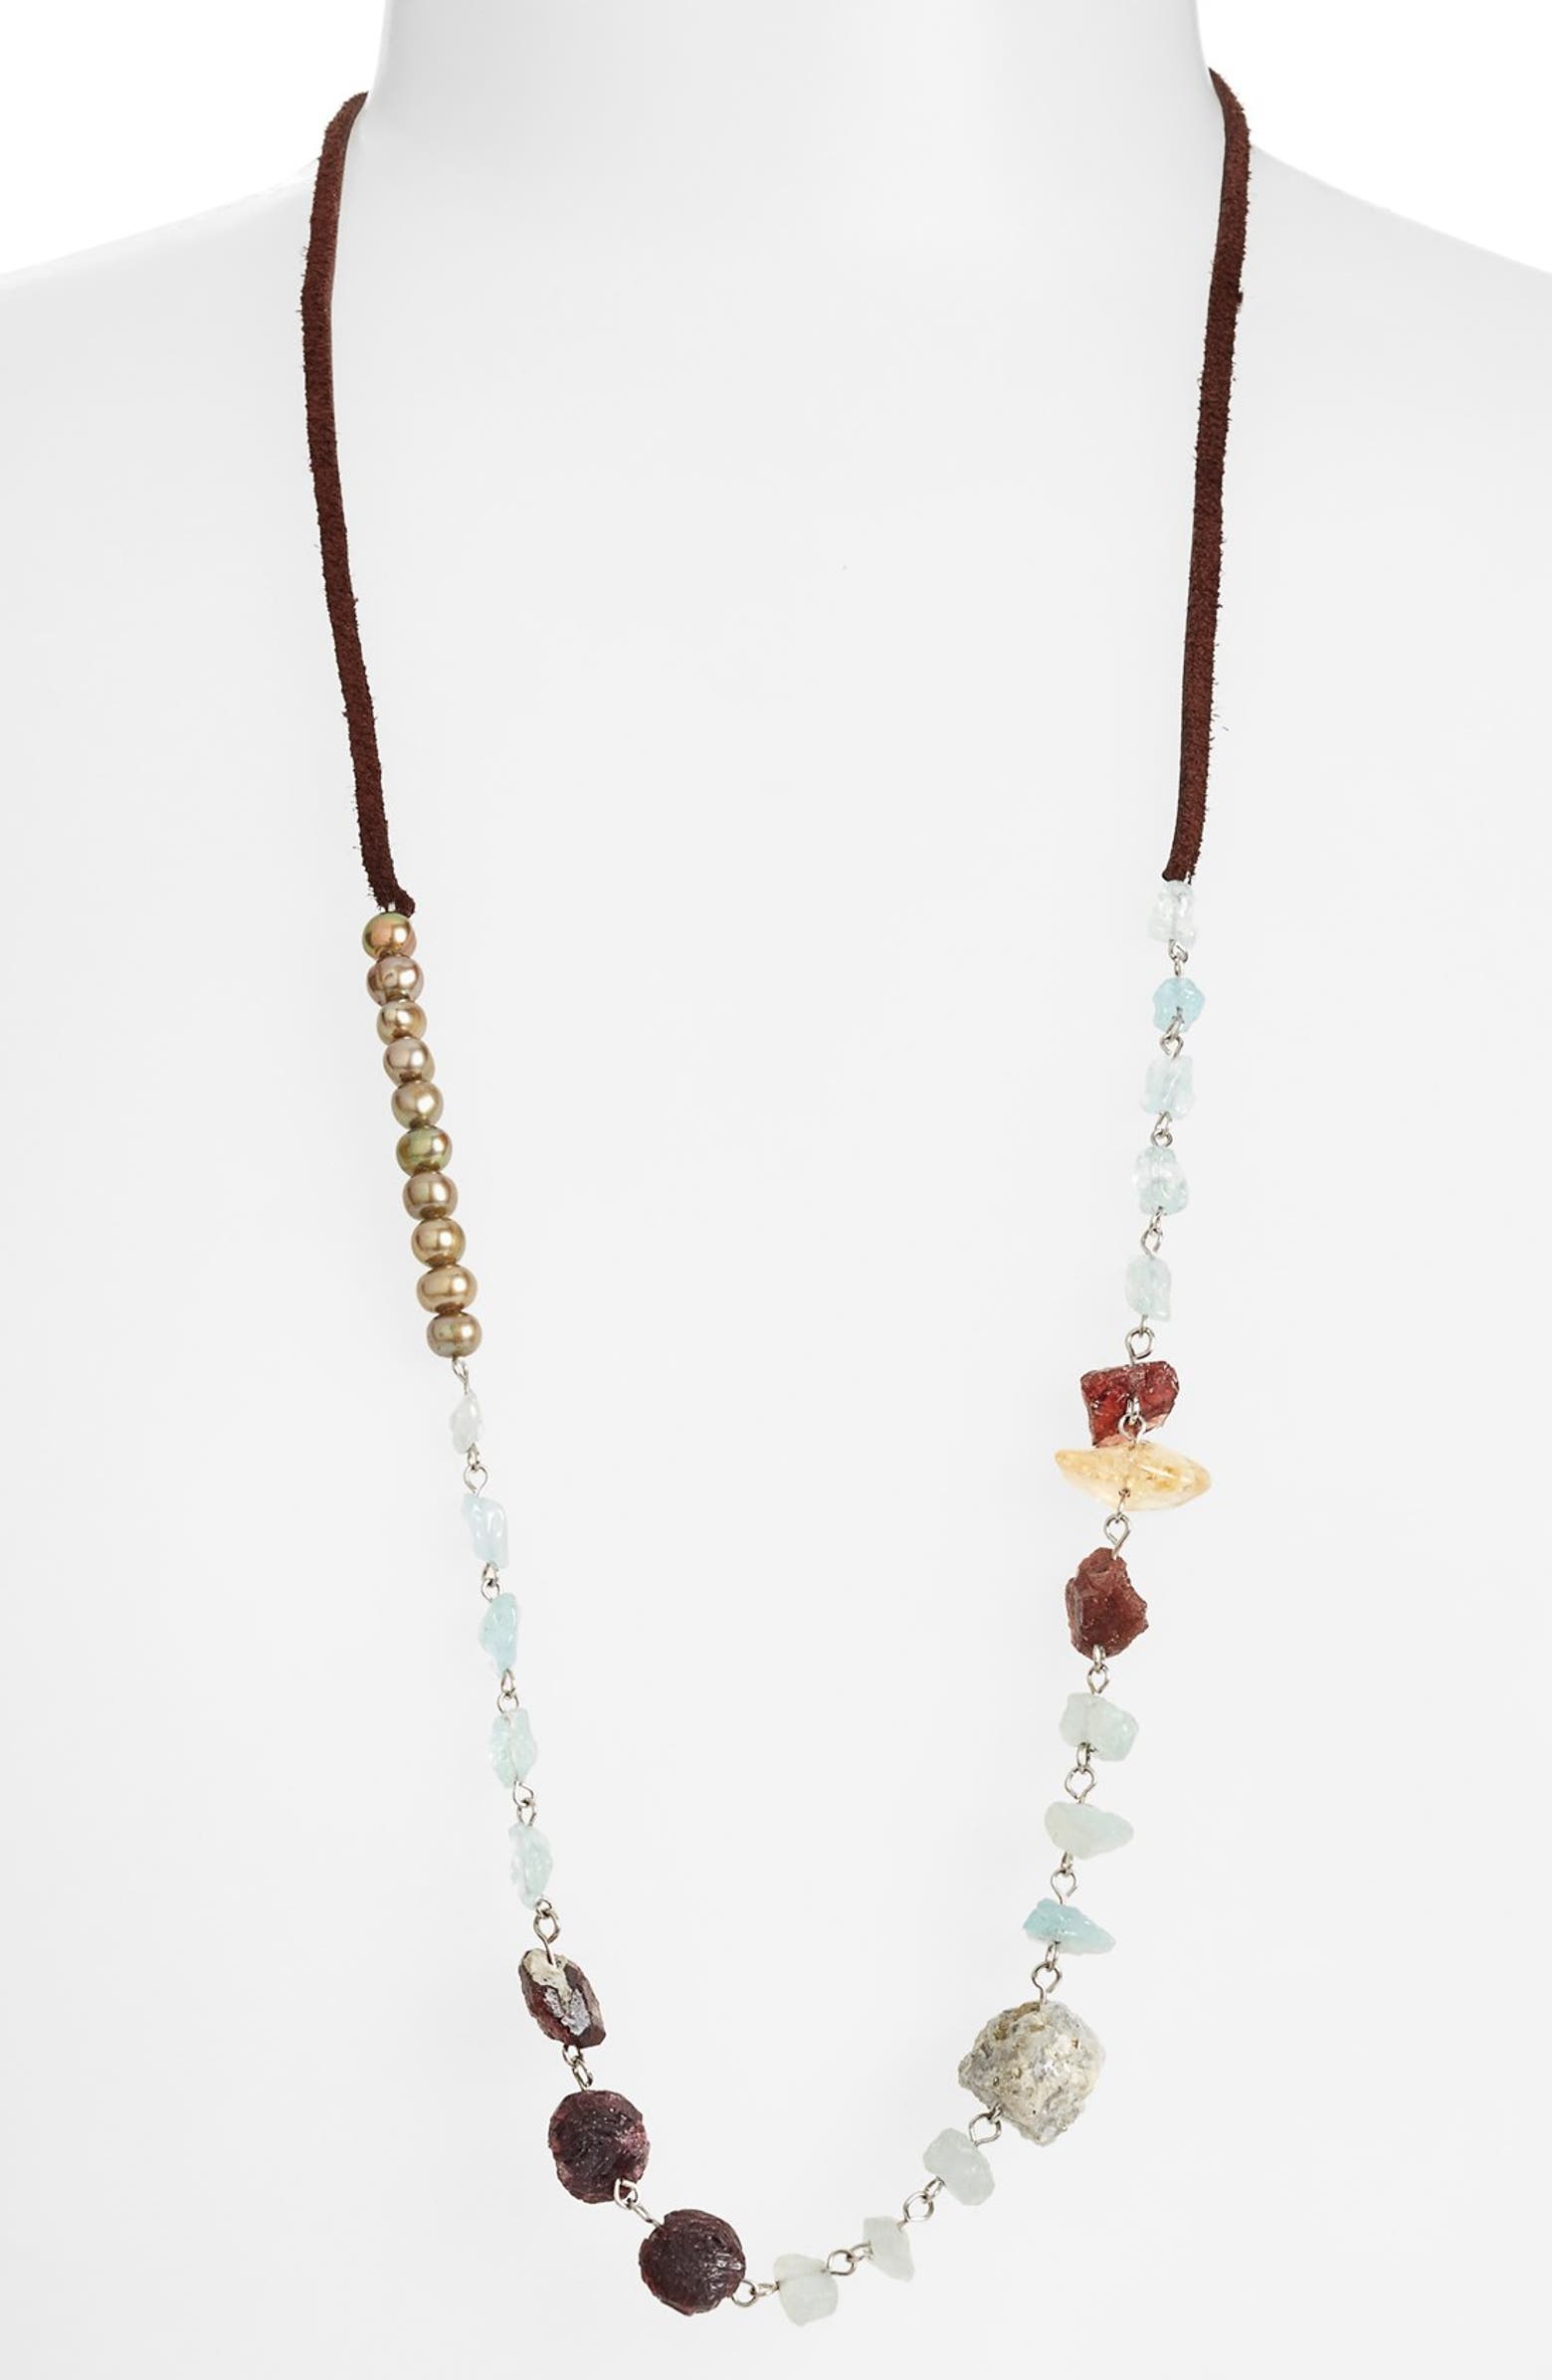 Berry Leather & Semiprecious Stone Necklace | Nordstrom